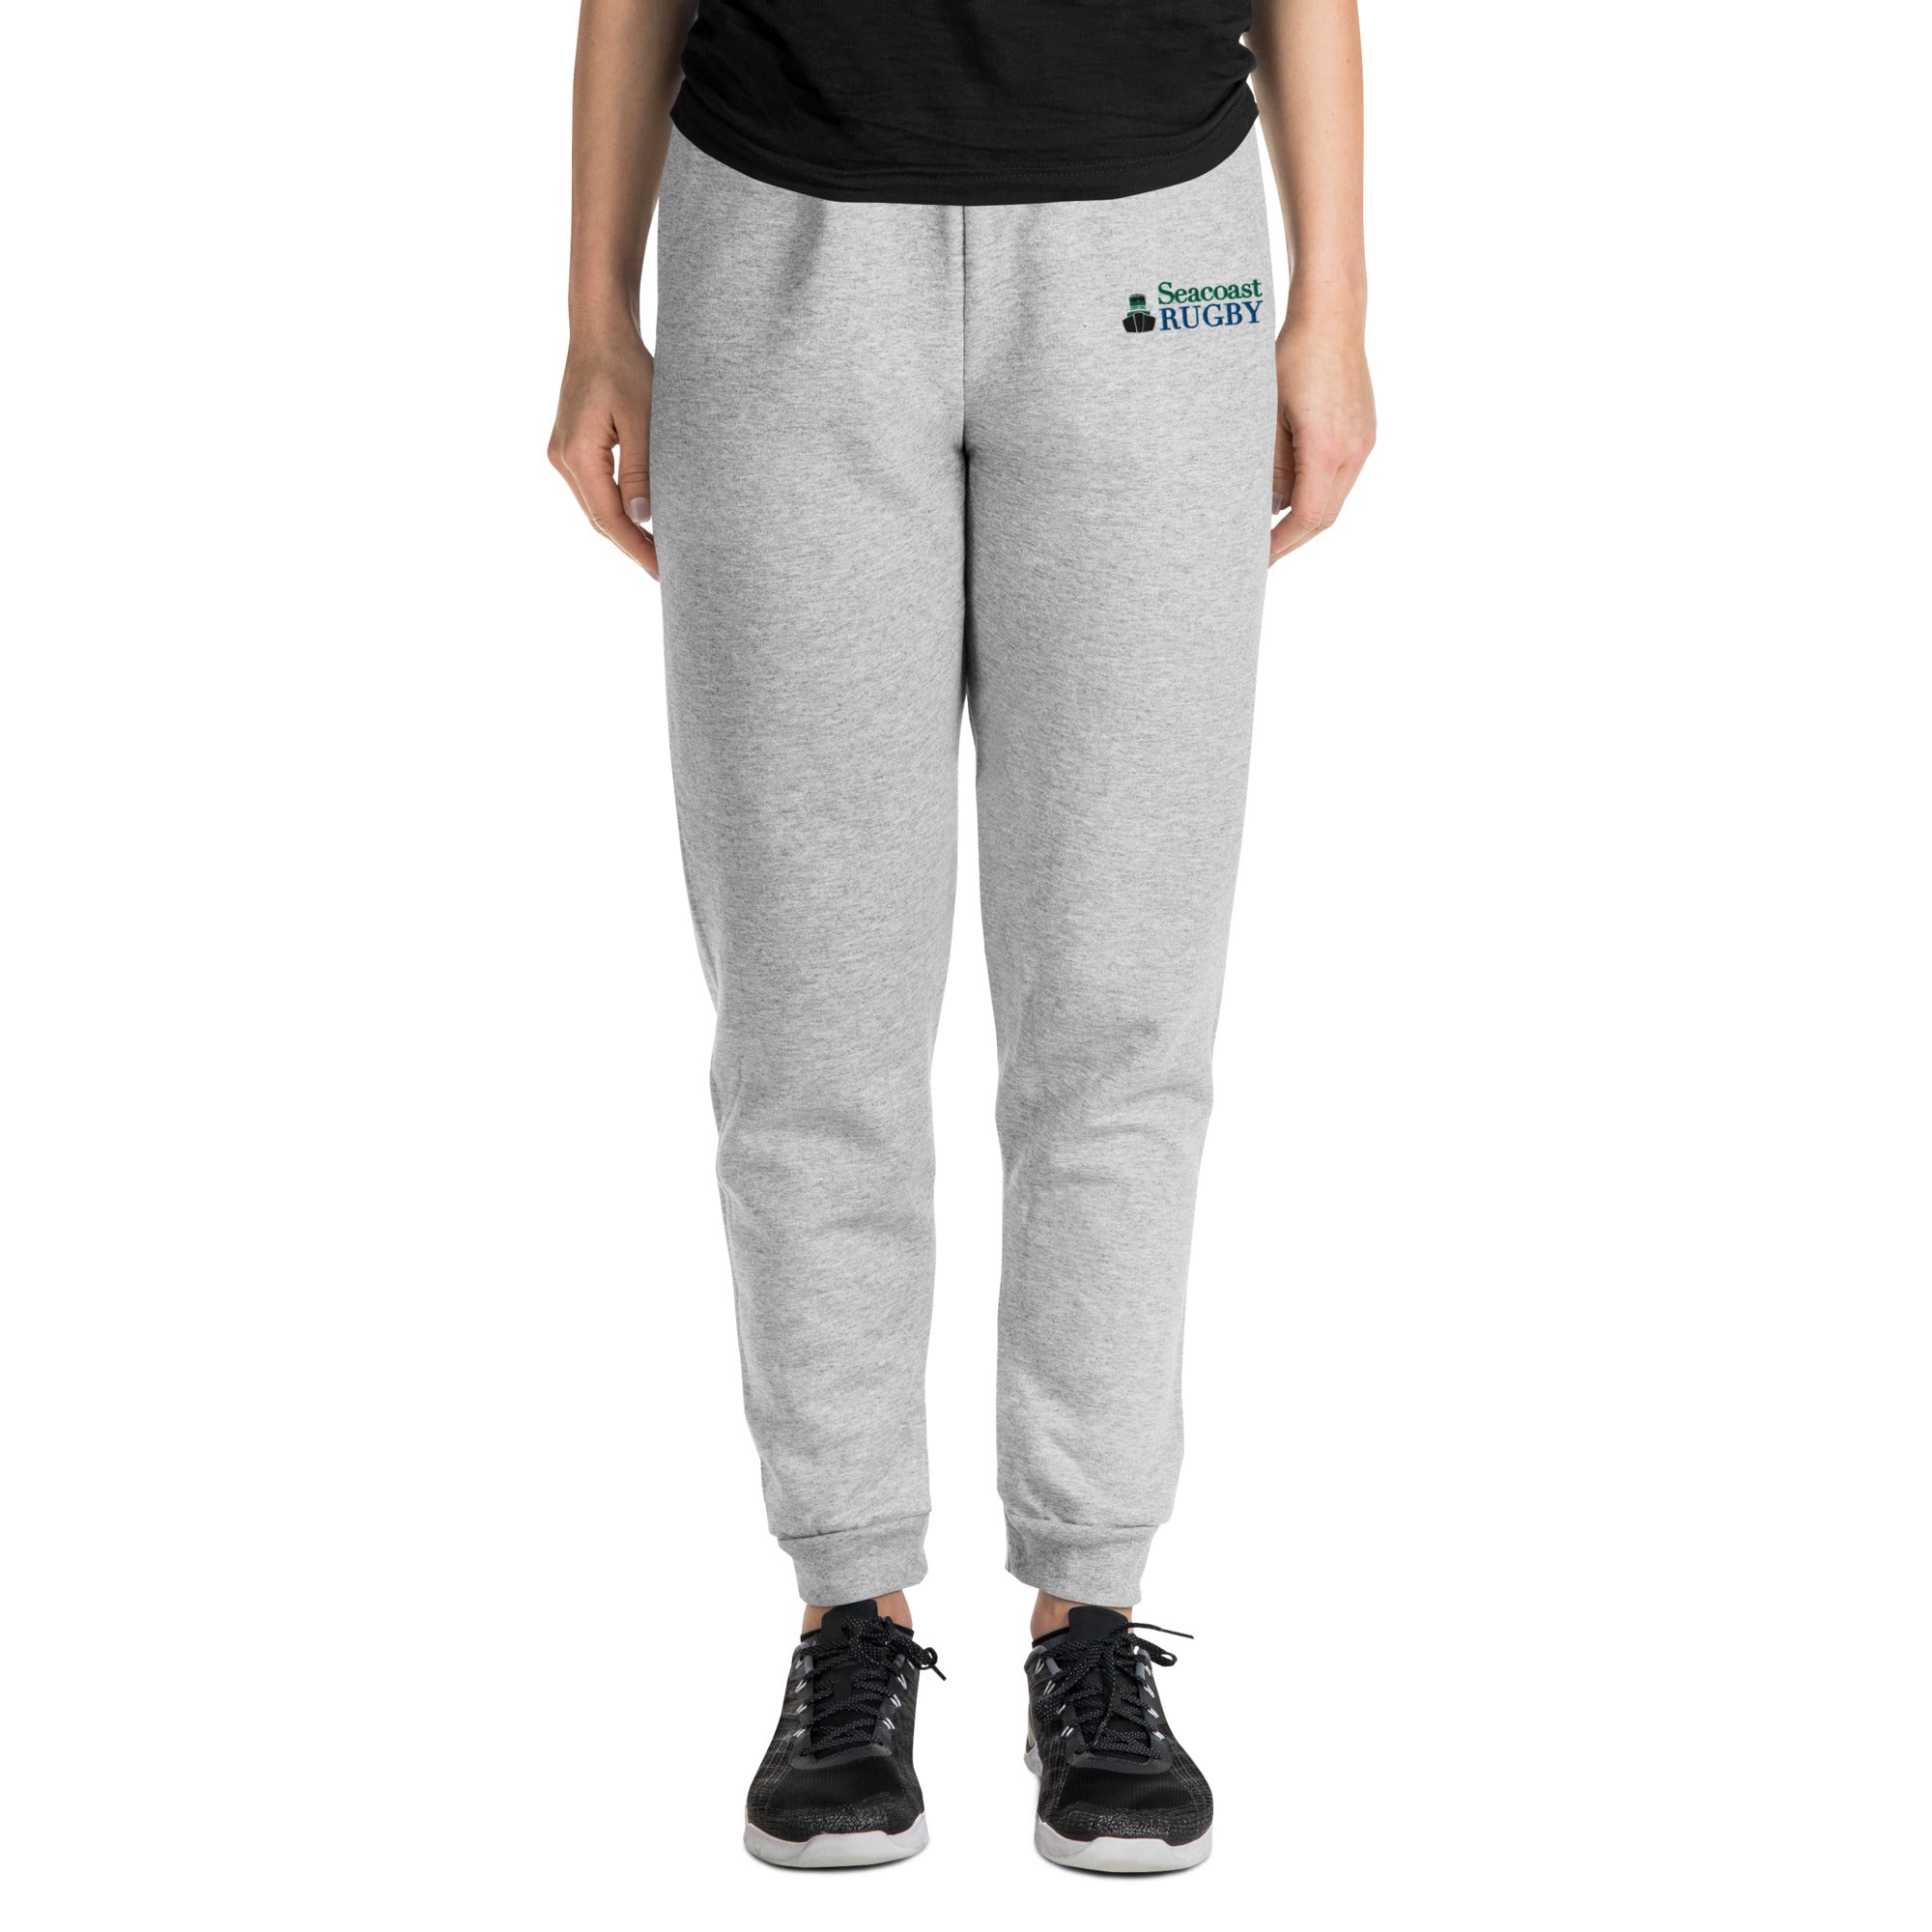 Rugby Imports Seacoast WR Jogger Sweatpants